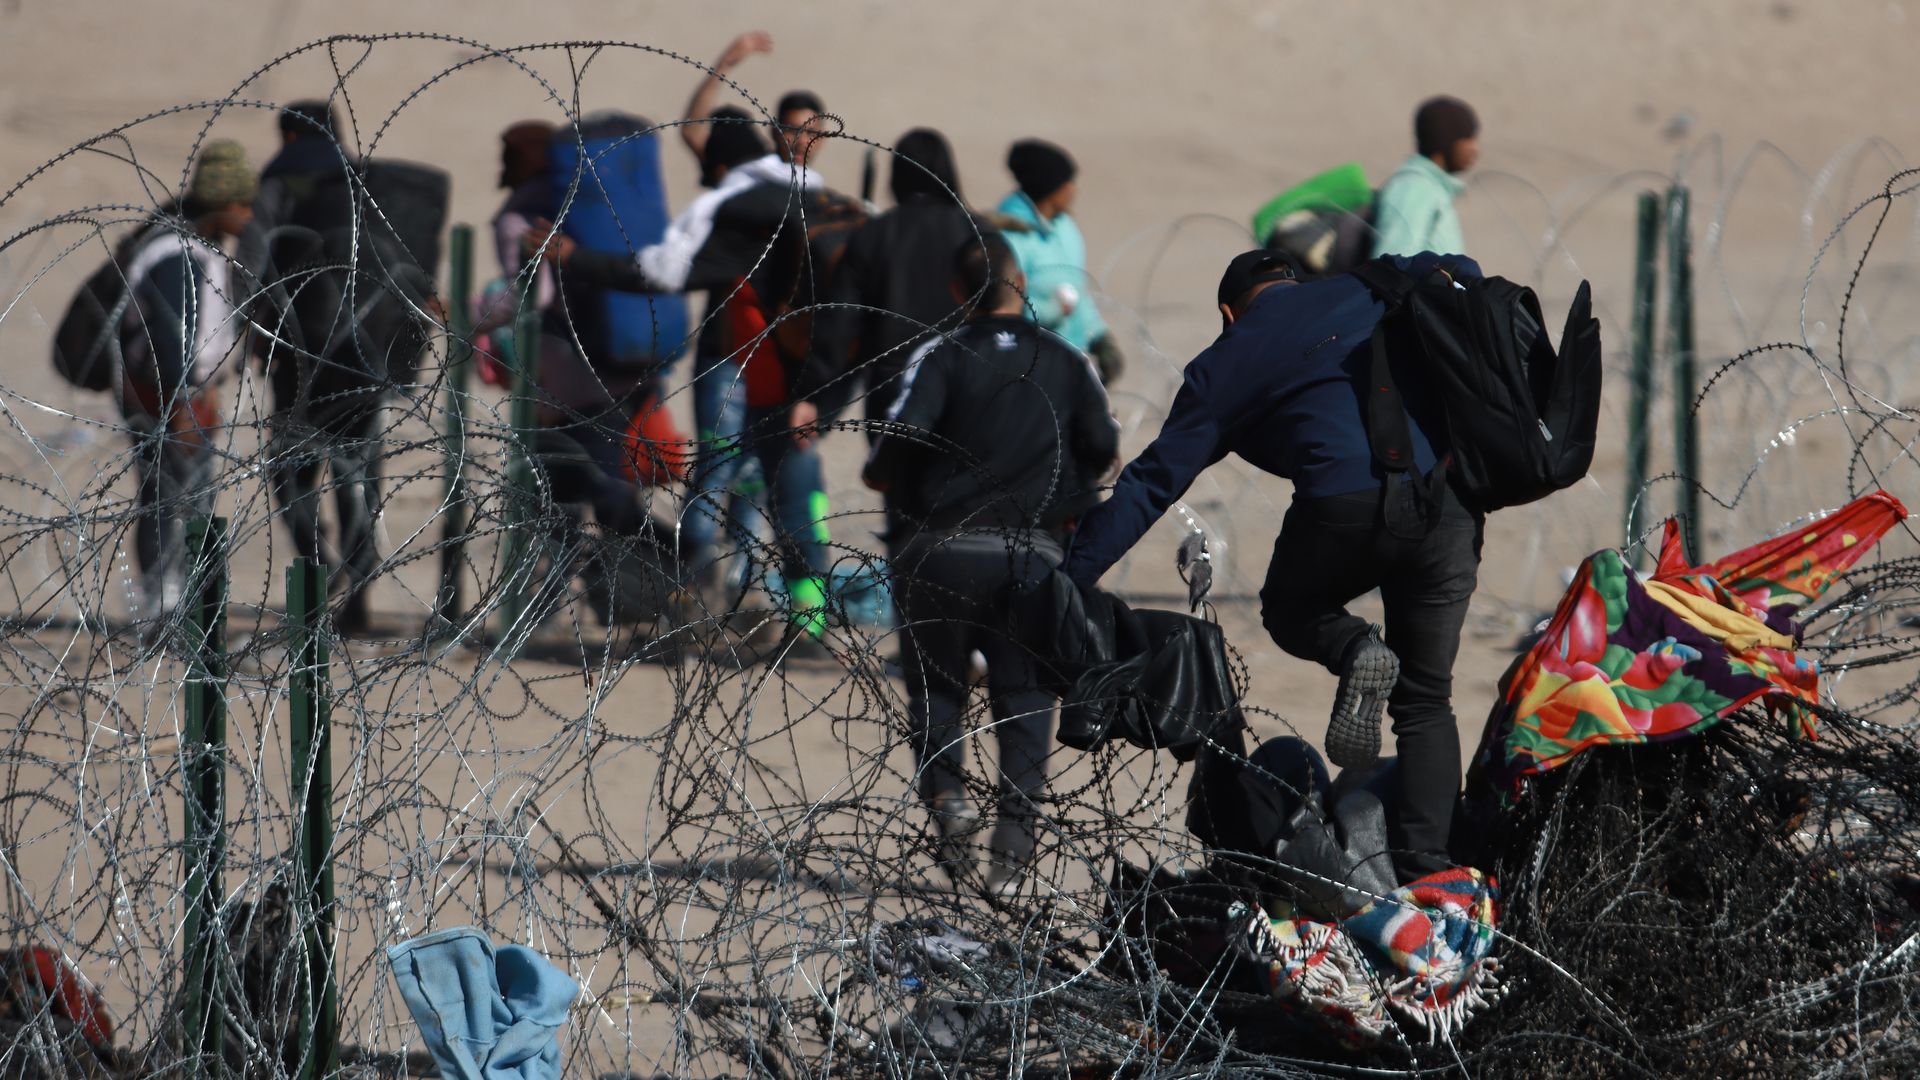 migrants are shown from behind walking among razor wire near the US/MEXICO border